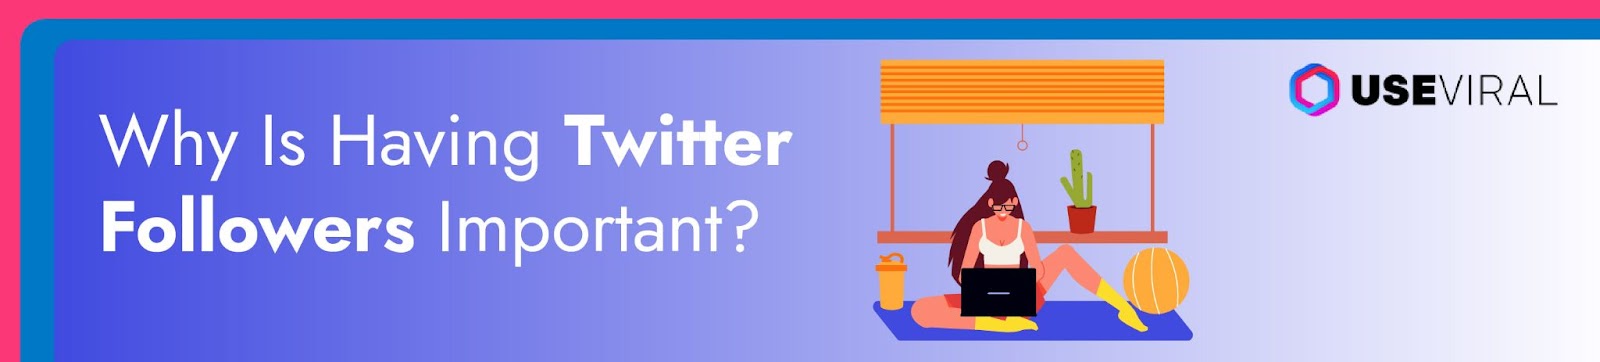 Why Is Having Twitter Followers Important?